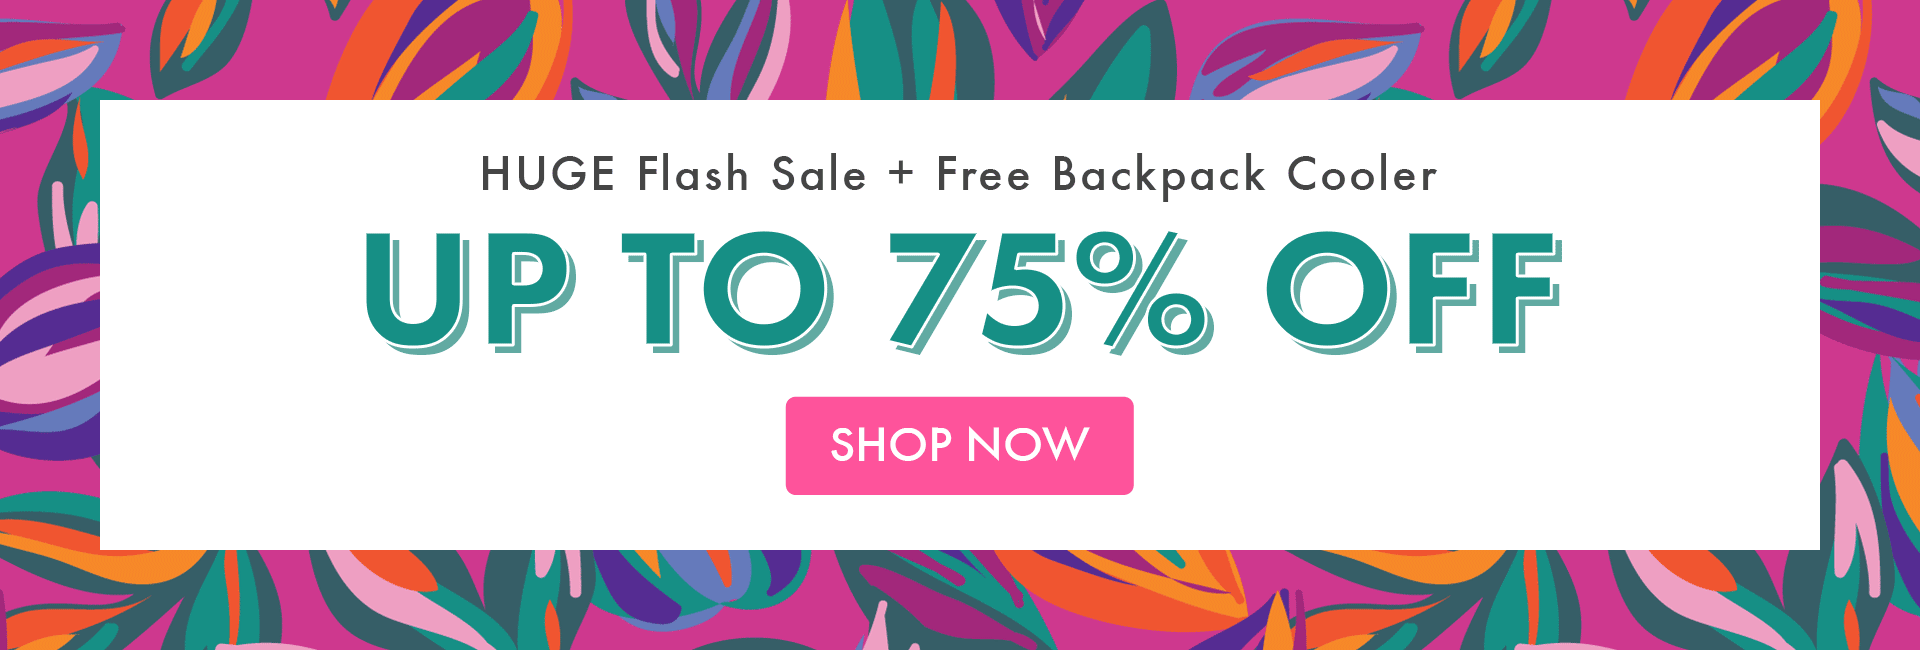 Shop Flash Sale + Claim your Free Backpack Cooler with $85+ purchase!